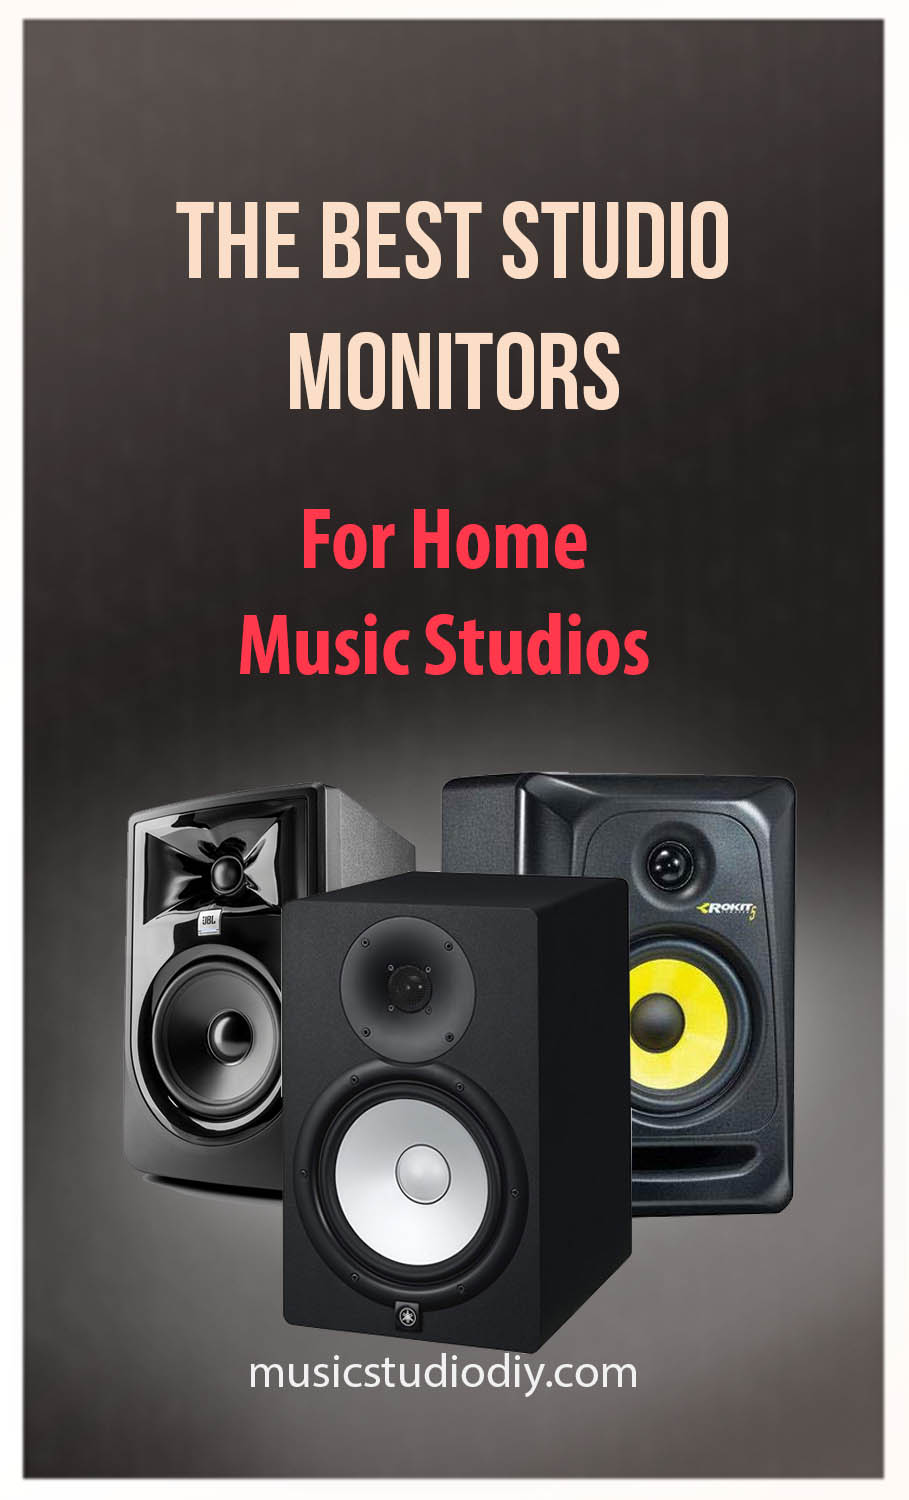 The Best Studio Monitors for Music Production